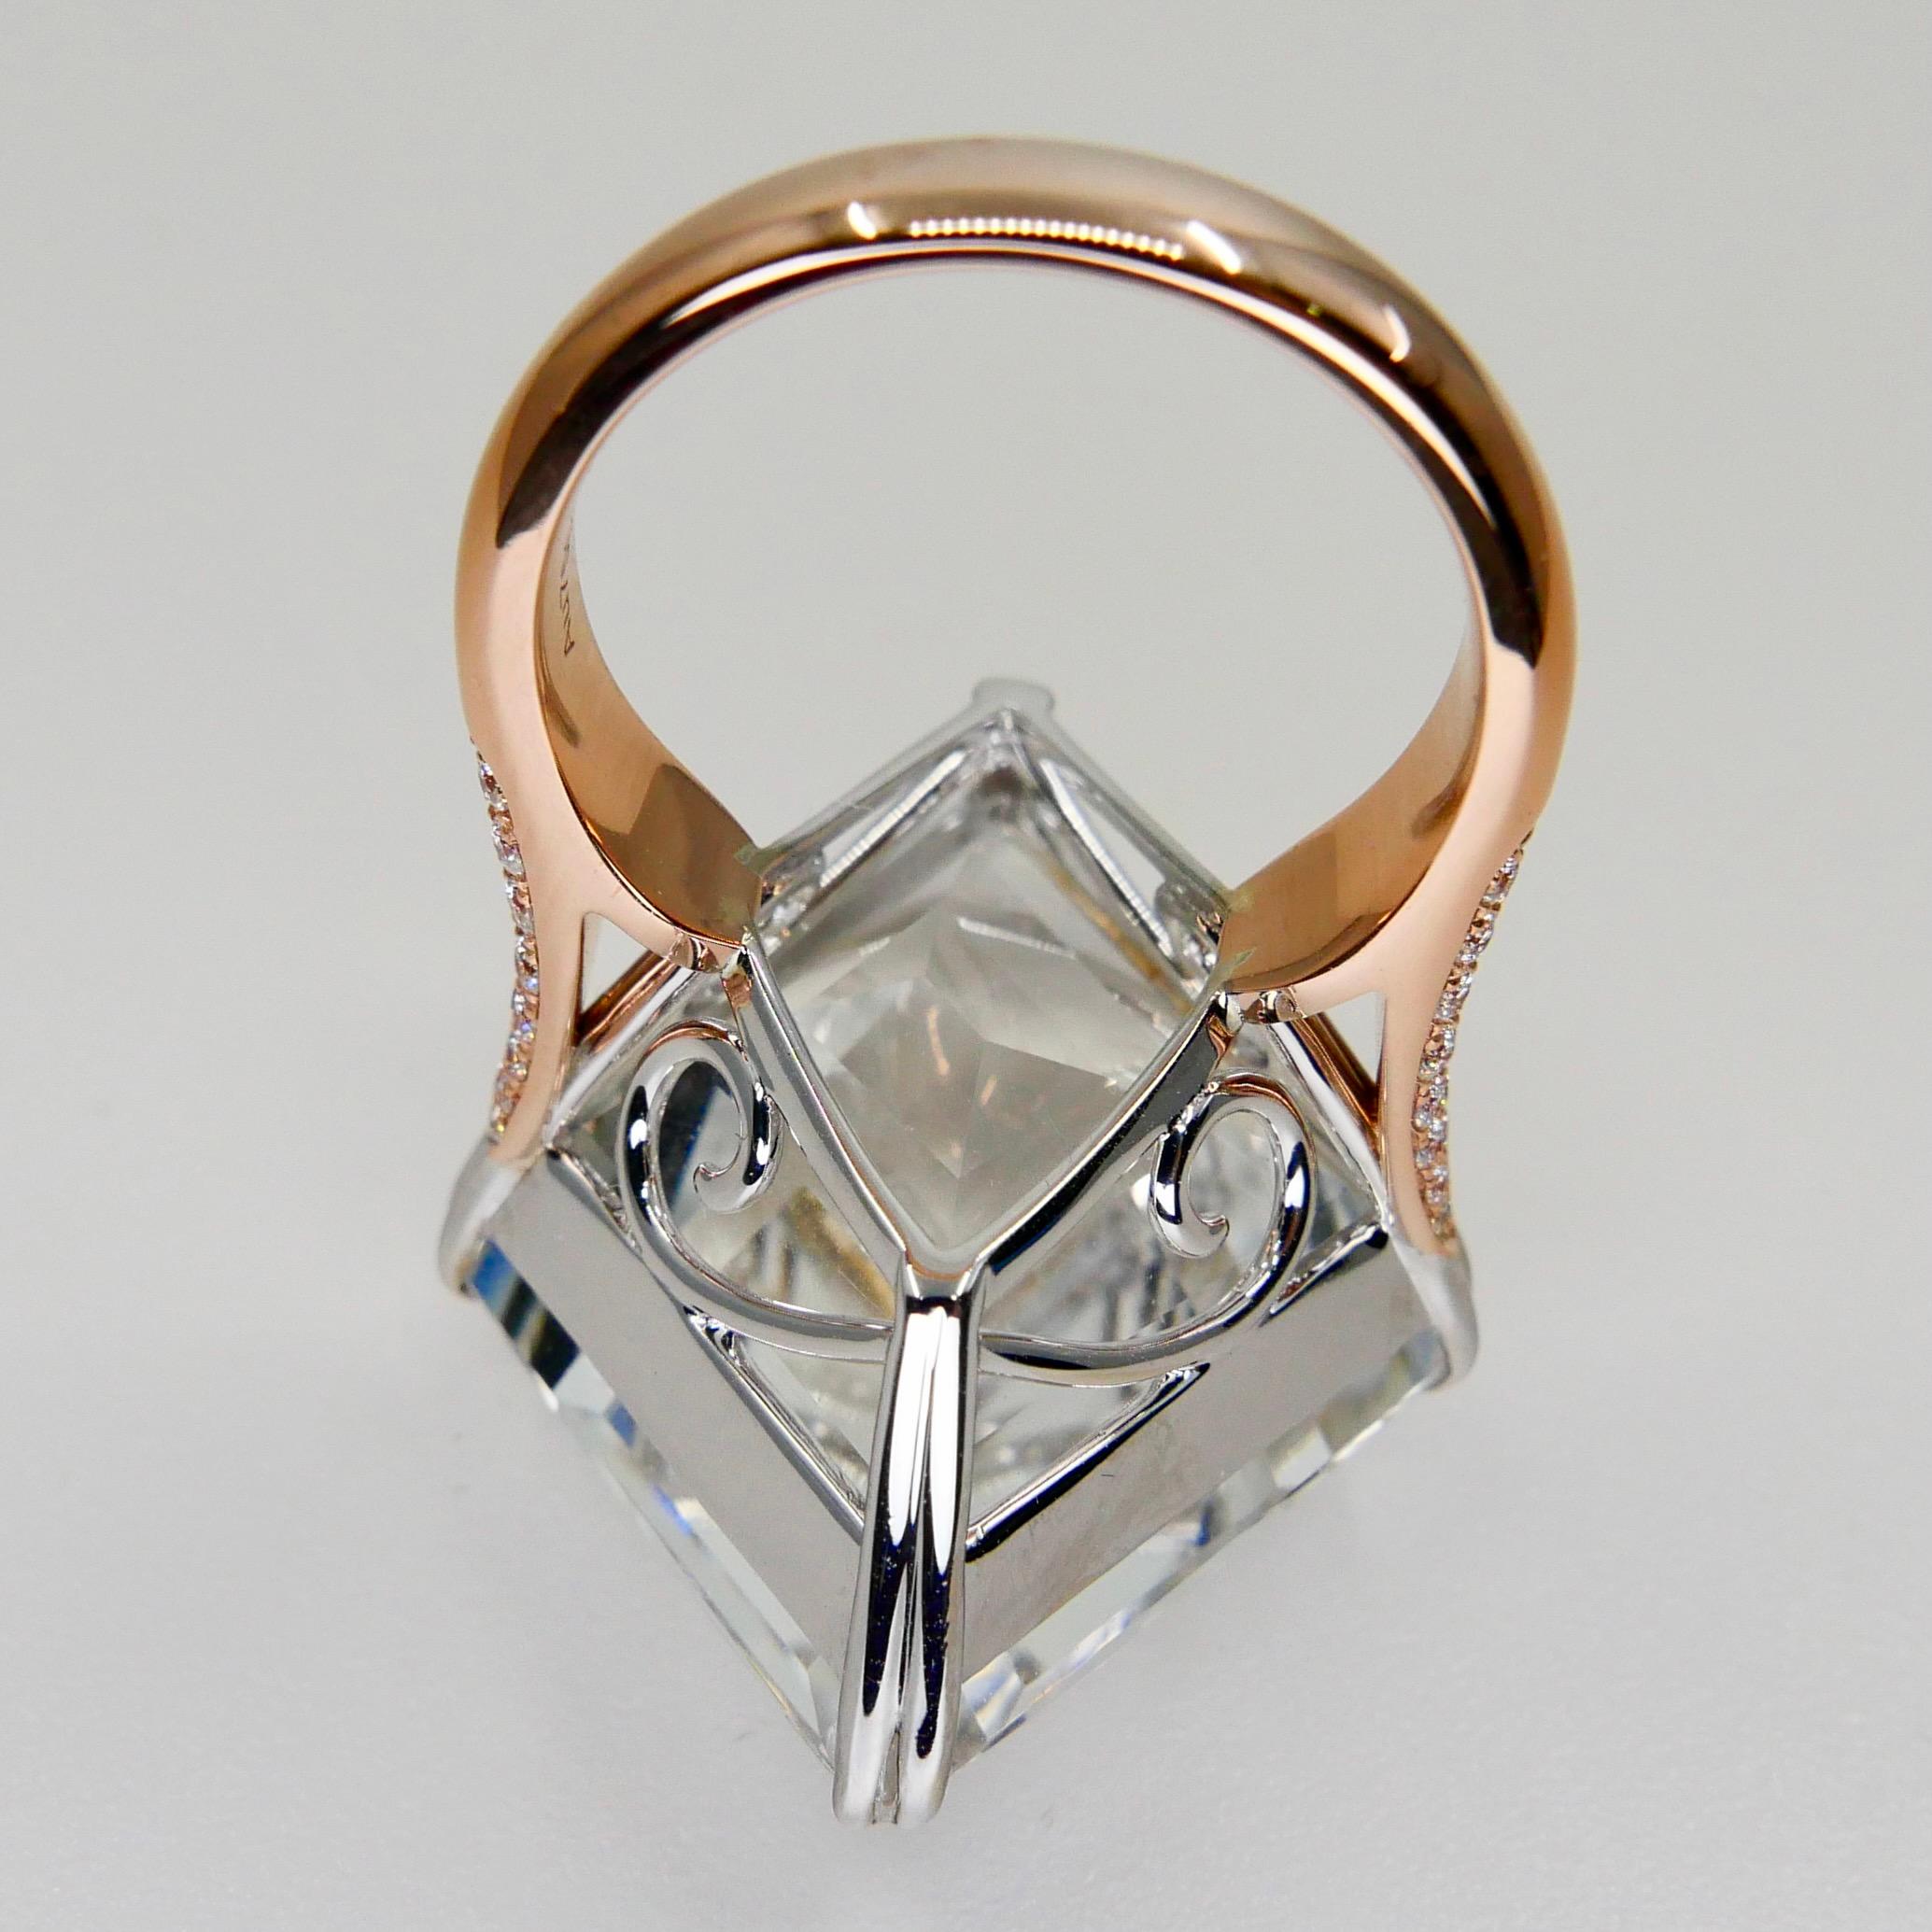 49.02 Carat Kite Step Cut White Topaz and Diamond Cocktail Ring, Massive For Sale 2